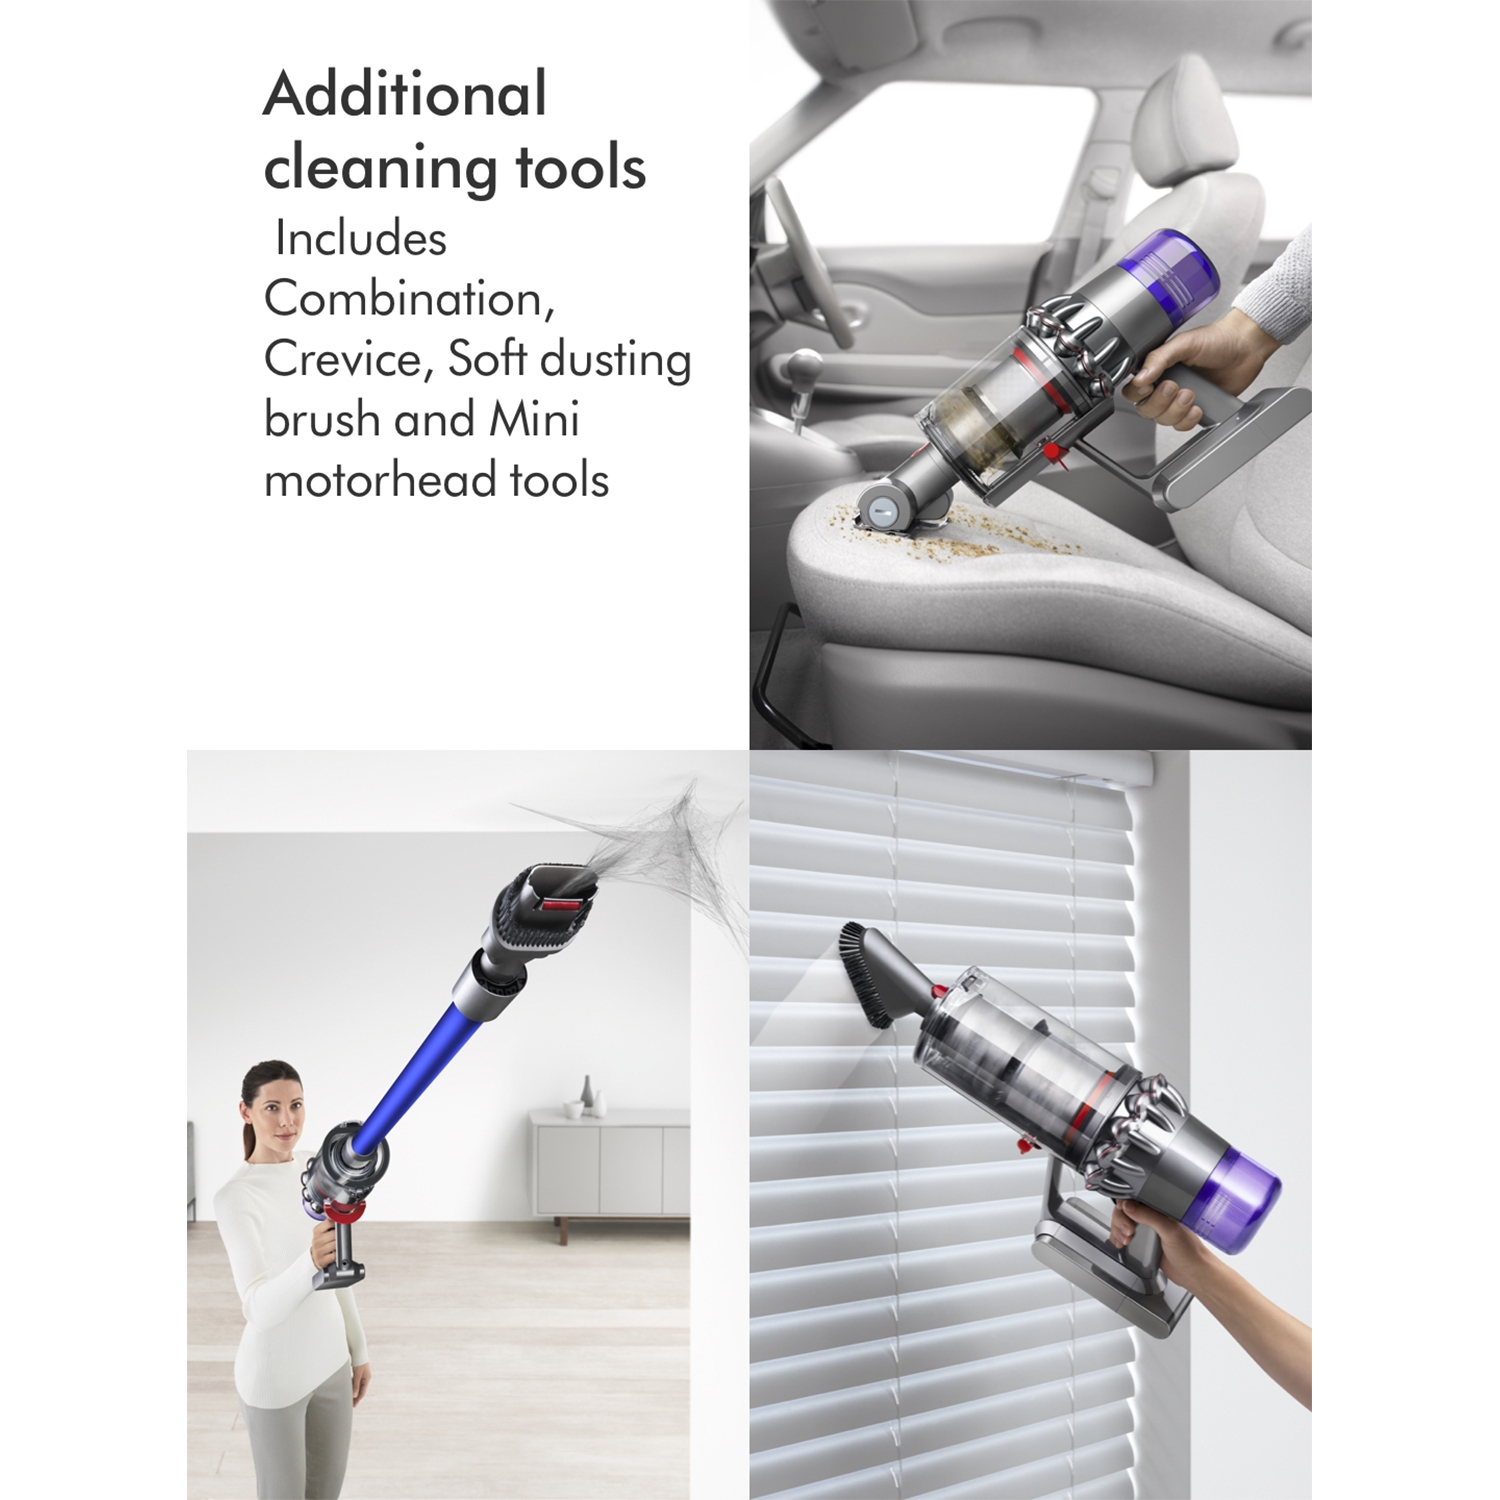 Dyson V11ABSOLUTE Cordless Vacuum Cleaner - 60 Minute Run Time - 7